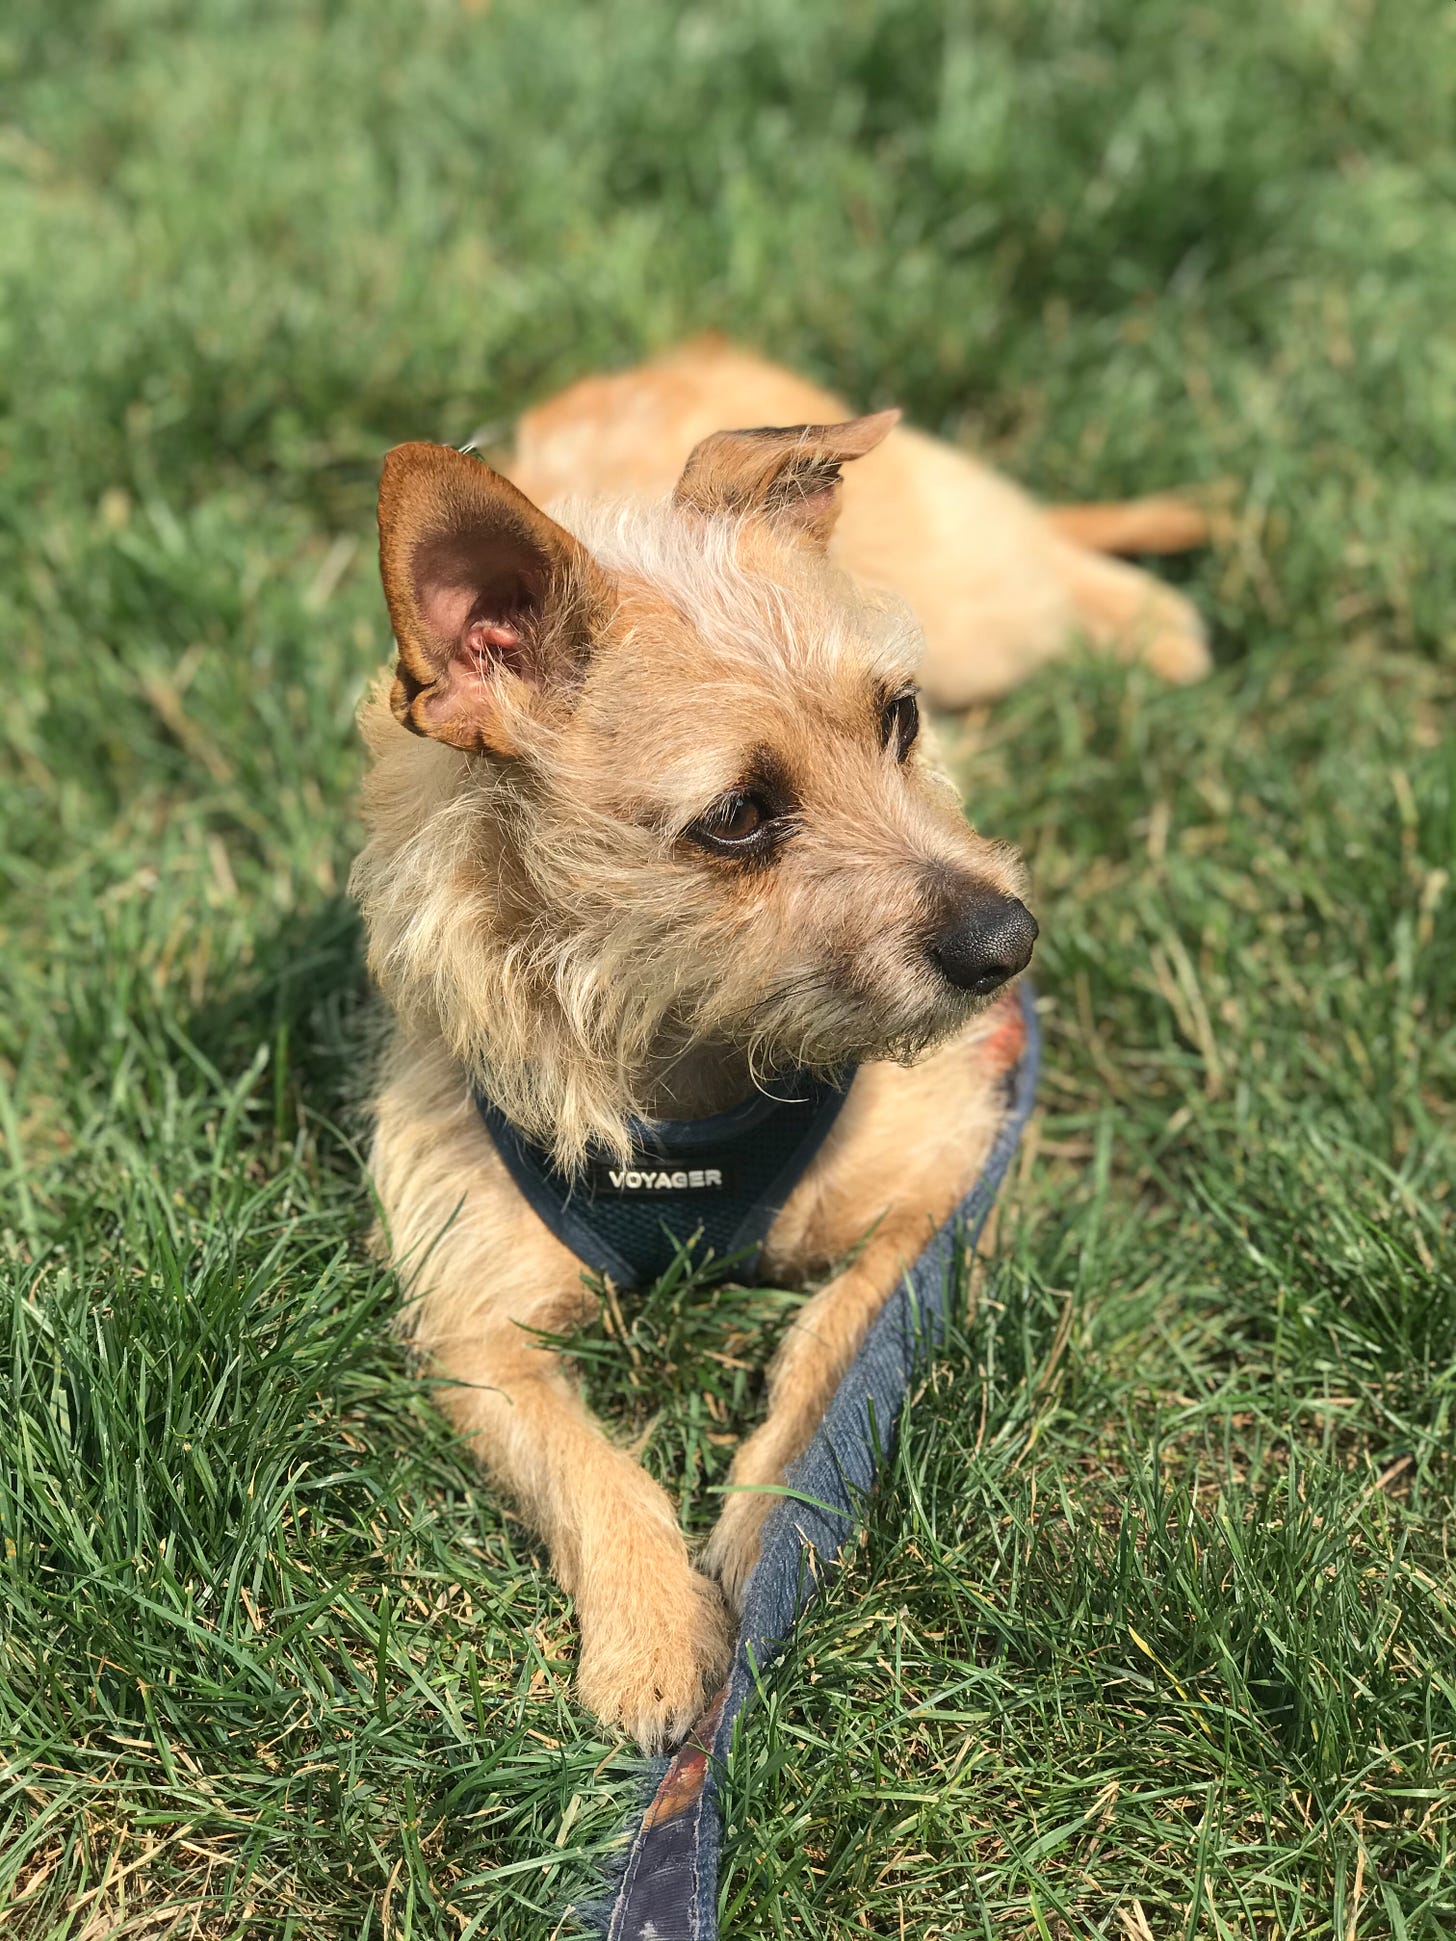 A small Cairn terrier-chihuahua mix dog sits outside on the grass, looking content.